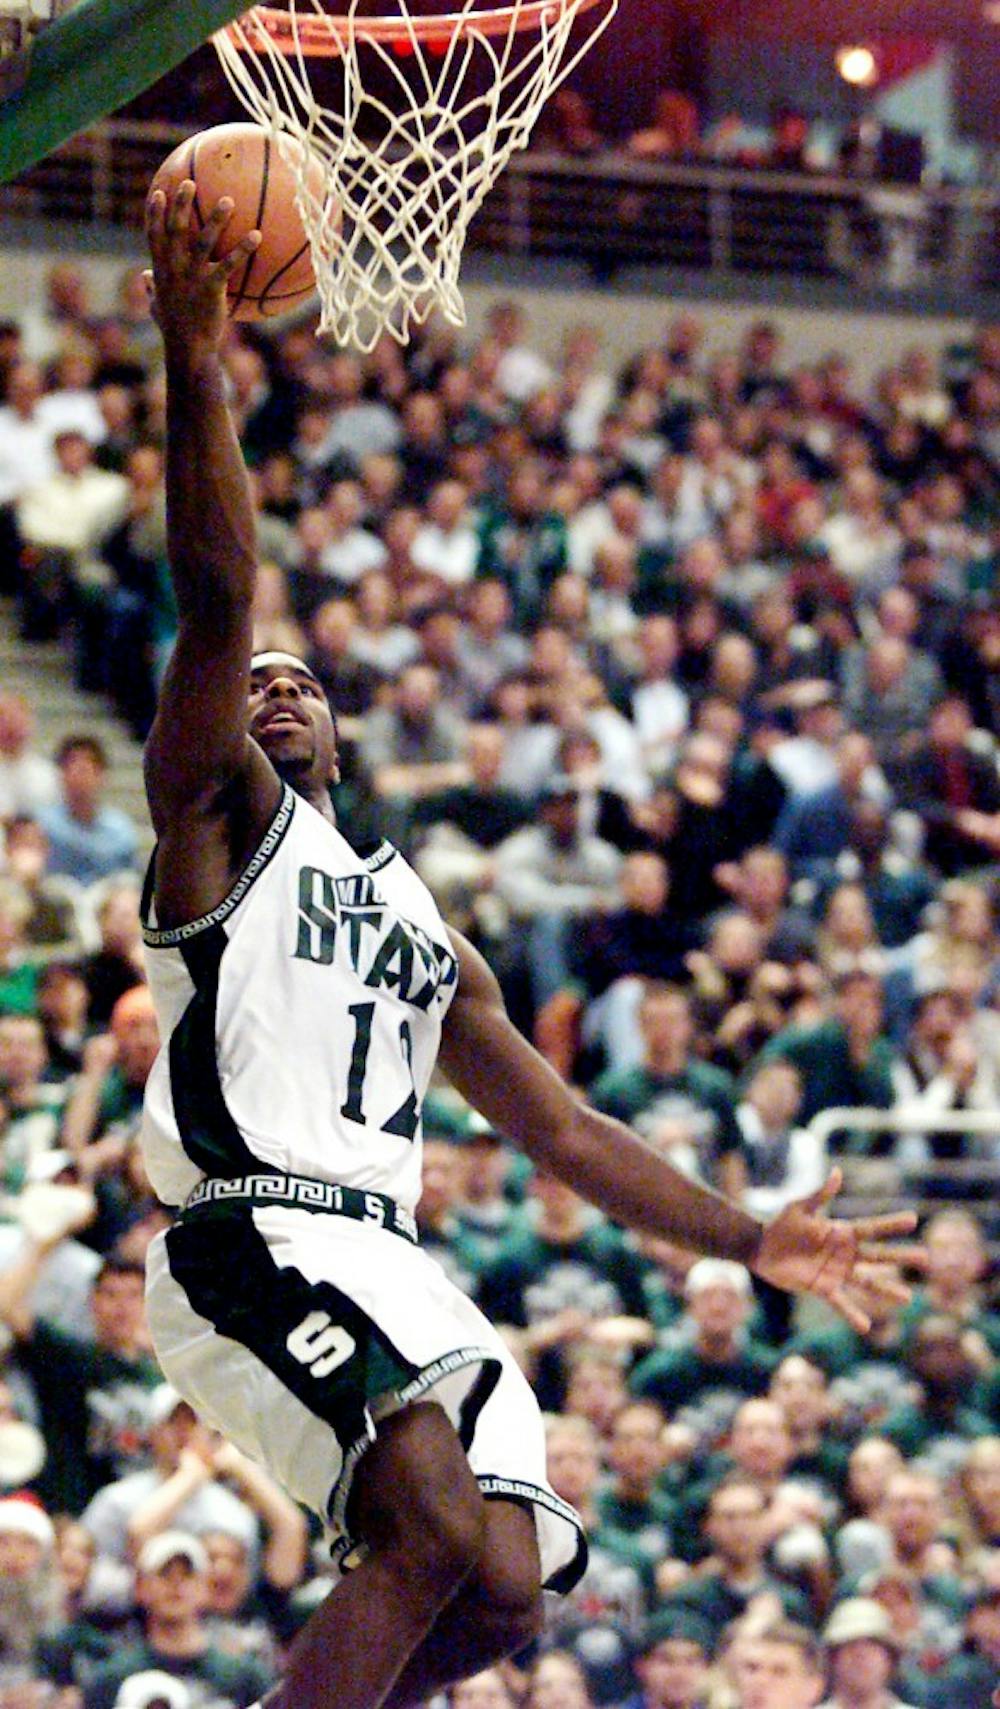 	<p><span class="caps">MSU</span> senior guard Mateen Cleaves goes up for a shot against Indiana on Jan. 11, 2000, at Breslin Center. Recently, Cleaves was named to the 2011 <span class="caps">MSU</span> Athletics Hall of Fame.</p>